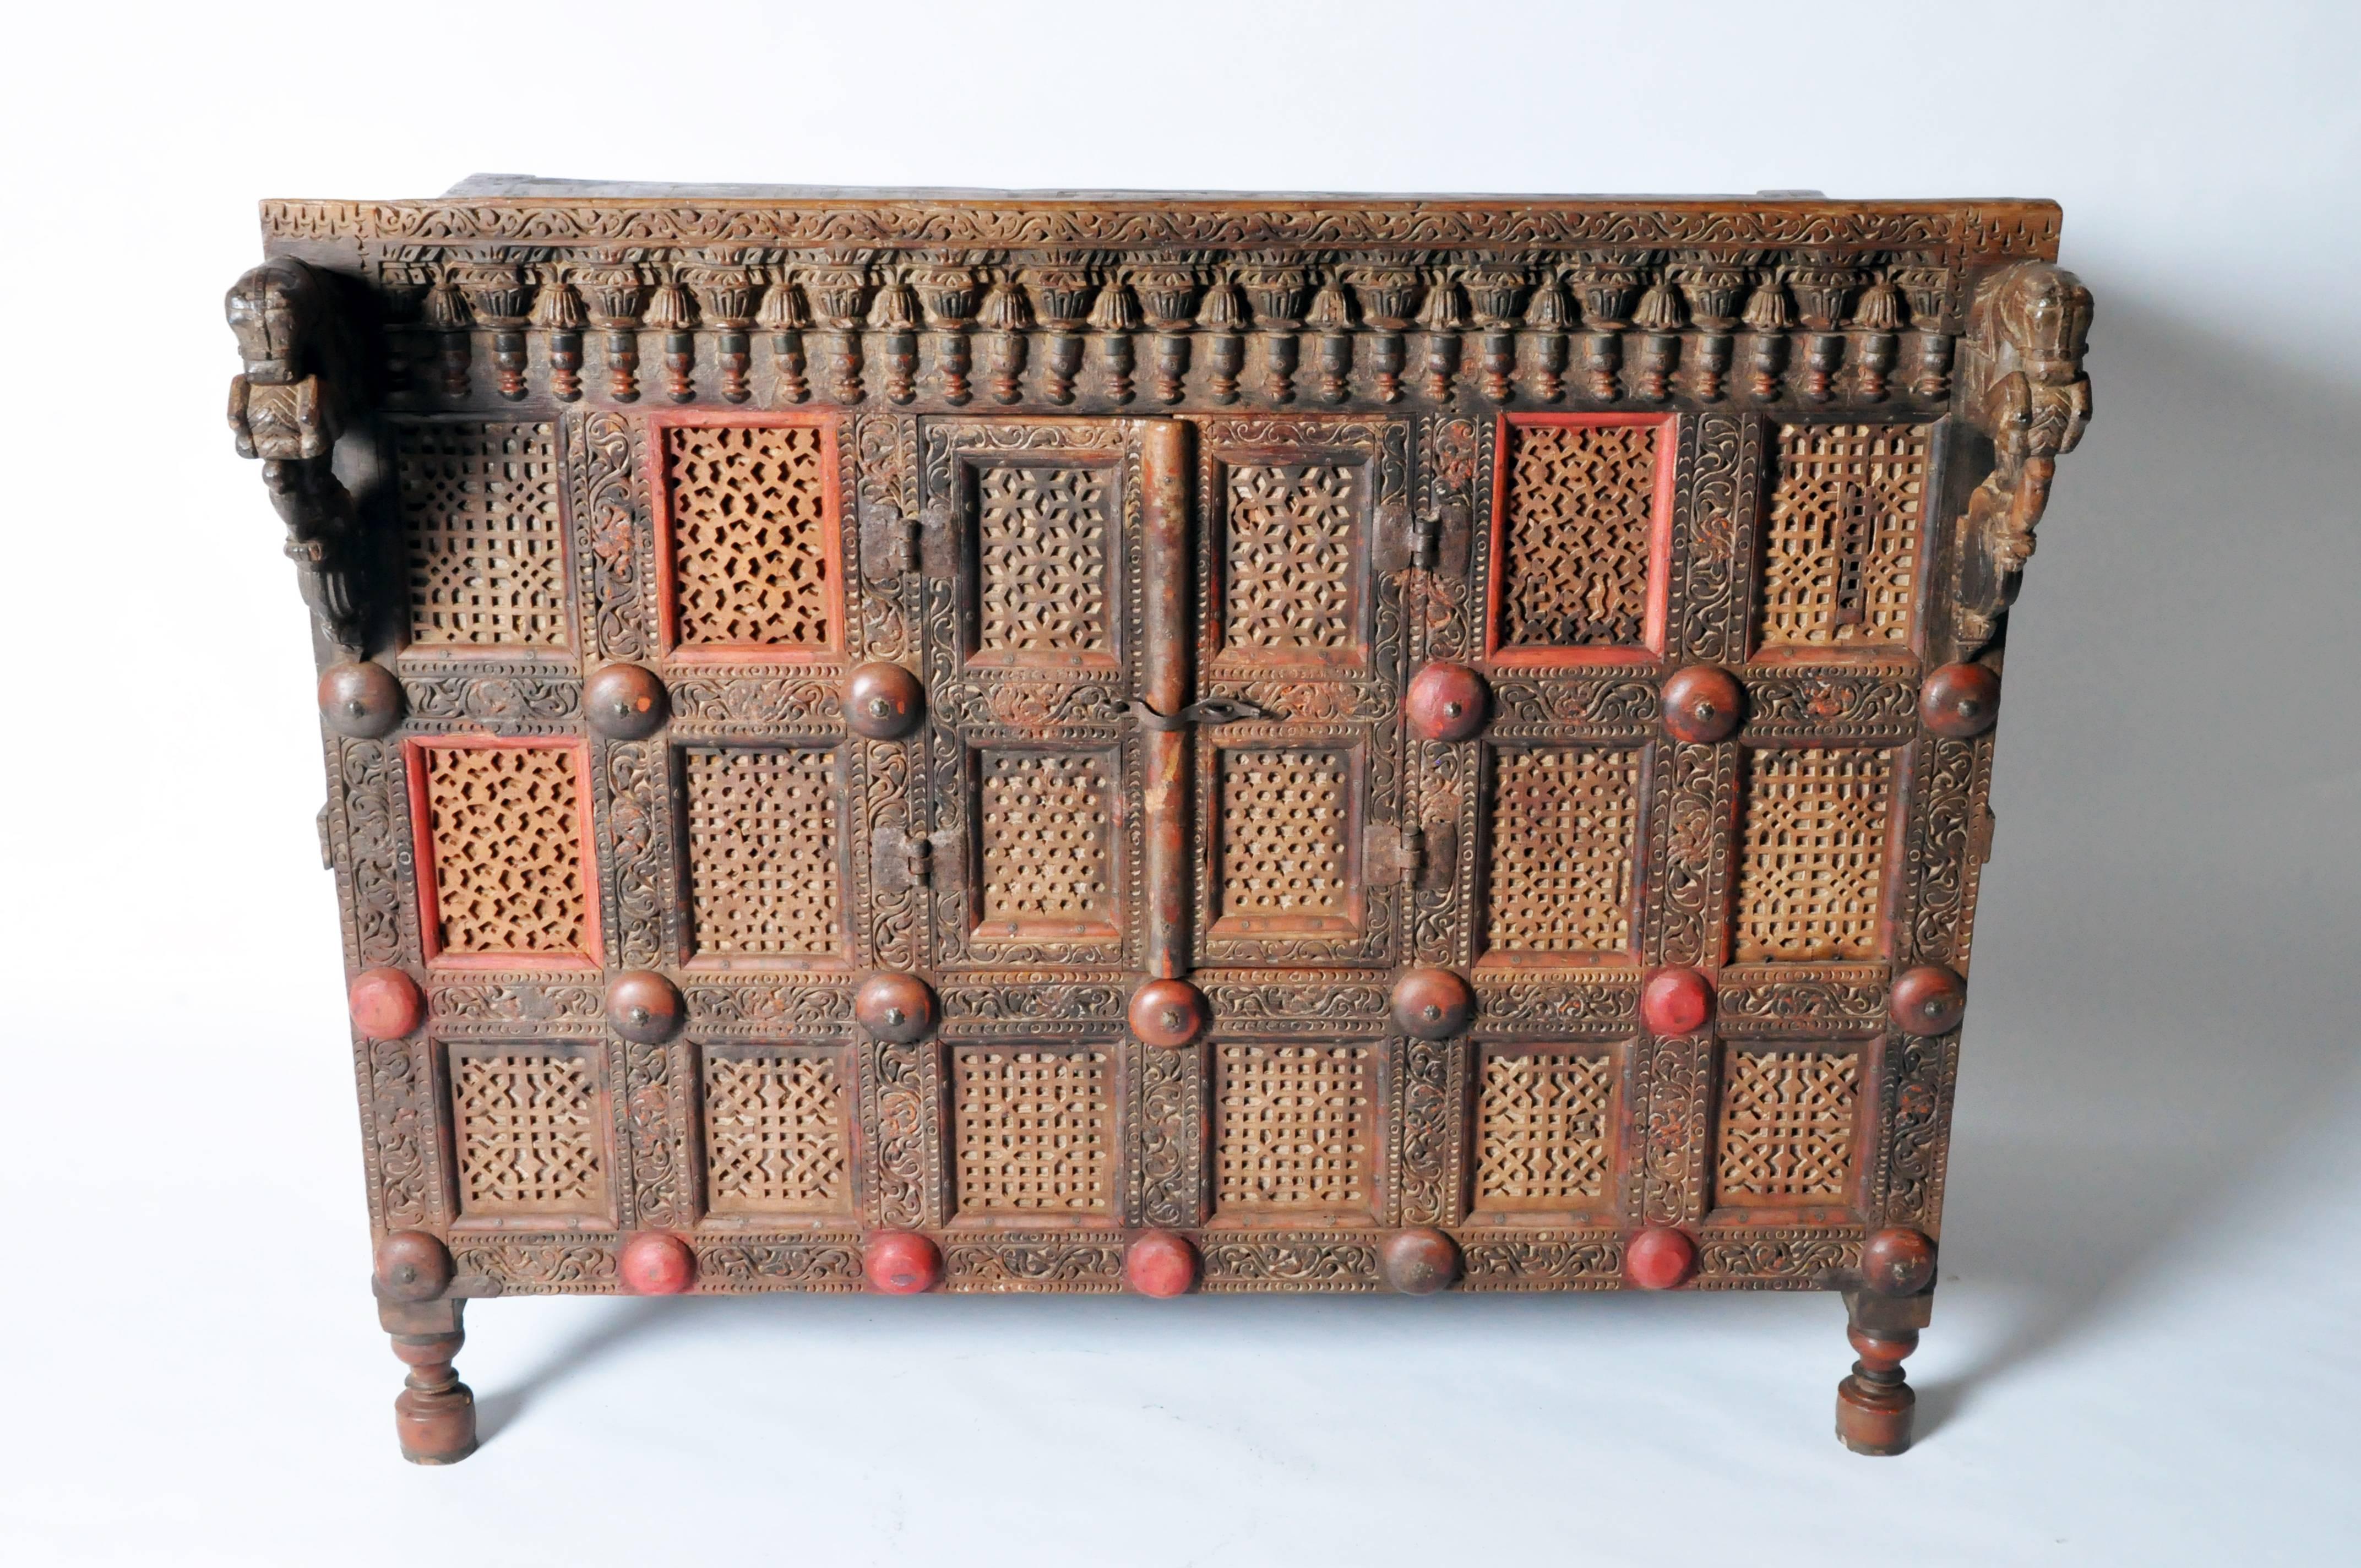 Traditionally used to store bridal dowries, this impressive wedding chest makes for an excellent sideboard or console. Intricately hand-carved with geometric patterns throughout, it features relief carved panels, two leaping horse-form brackets and